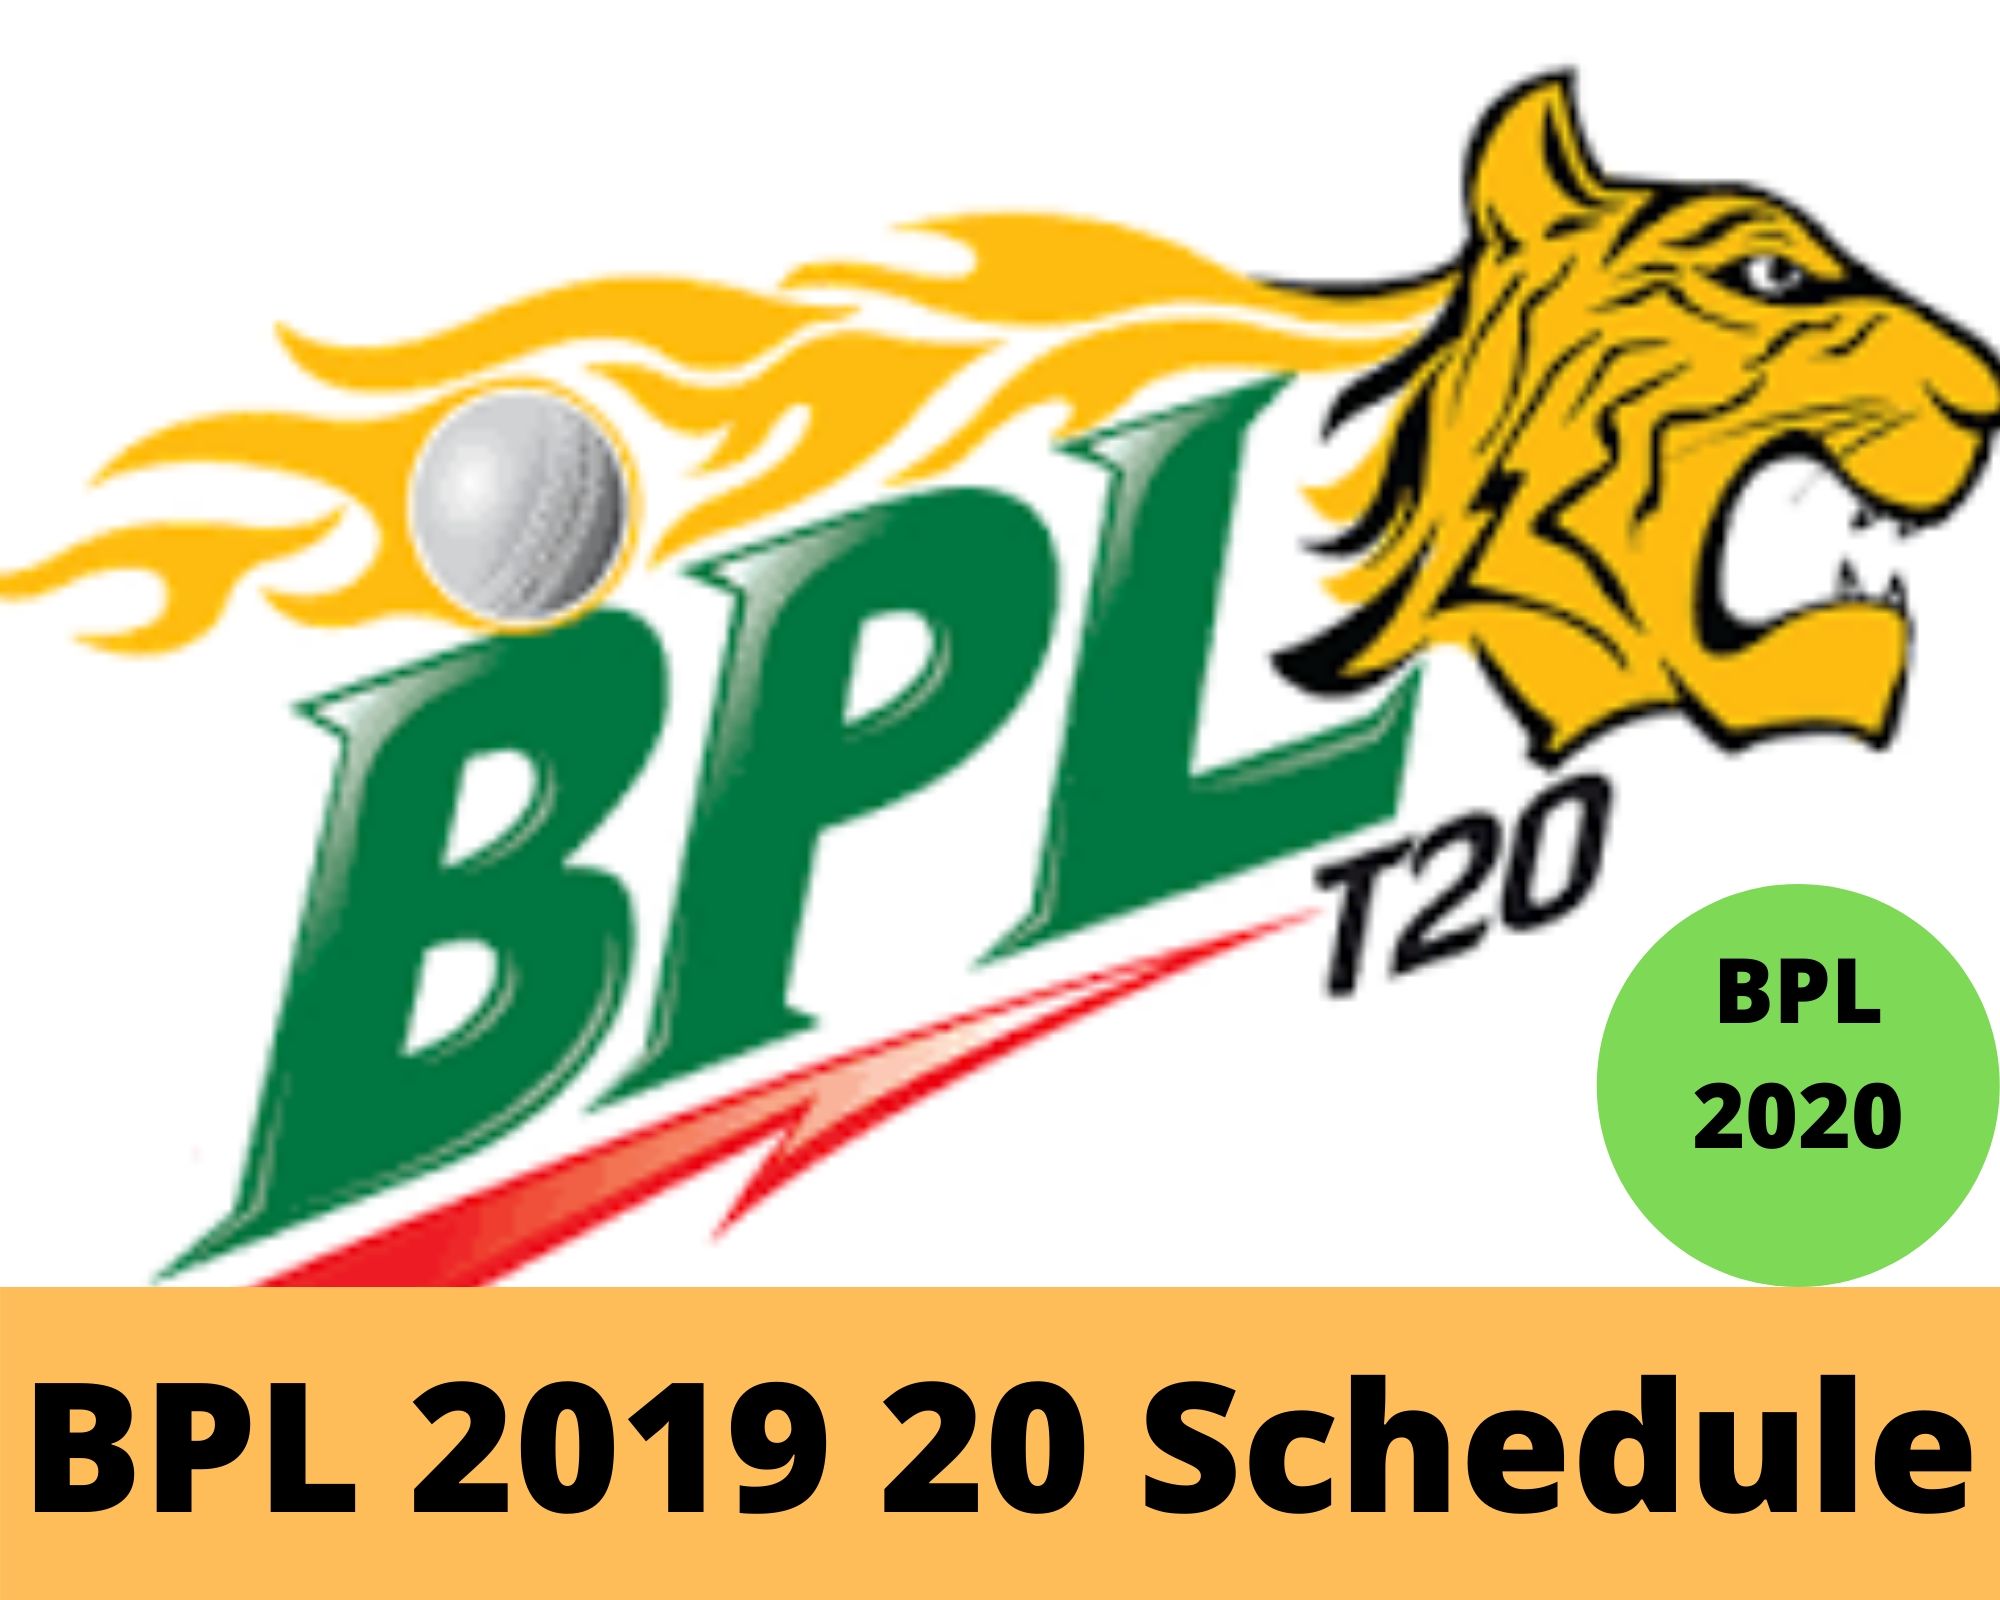 BPL Schedule 2020/21, Fixture, Match Time Table and Venues